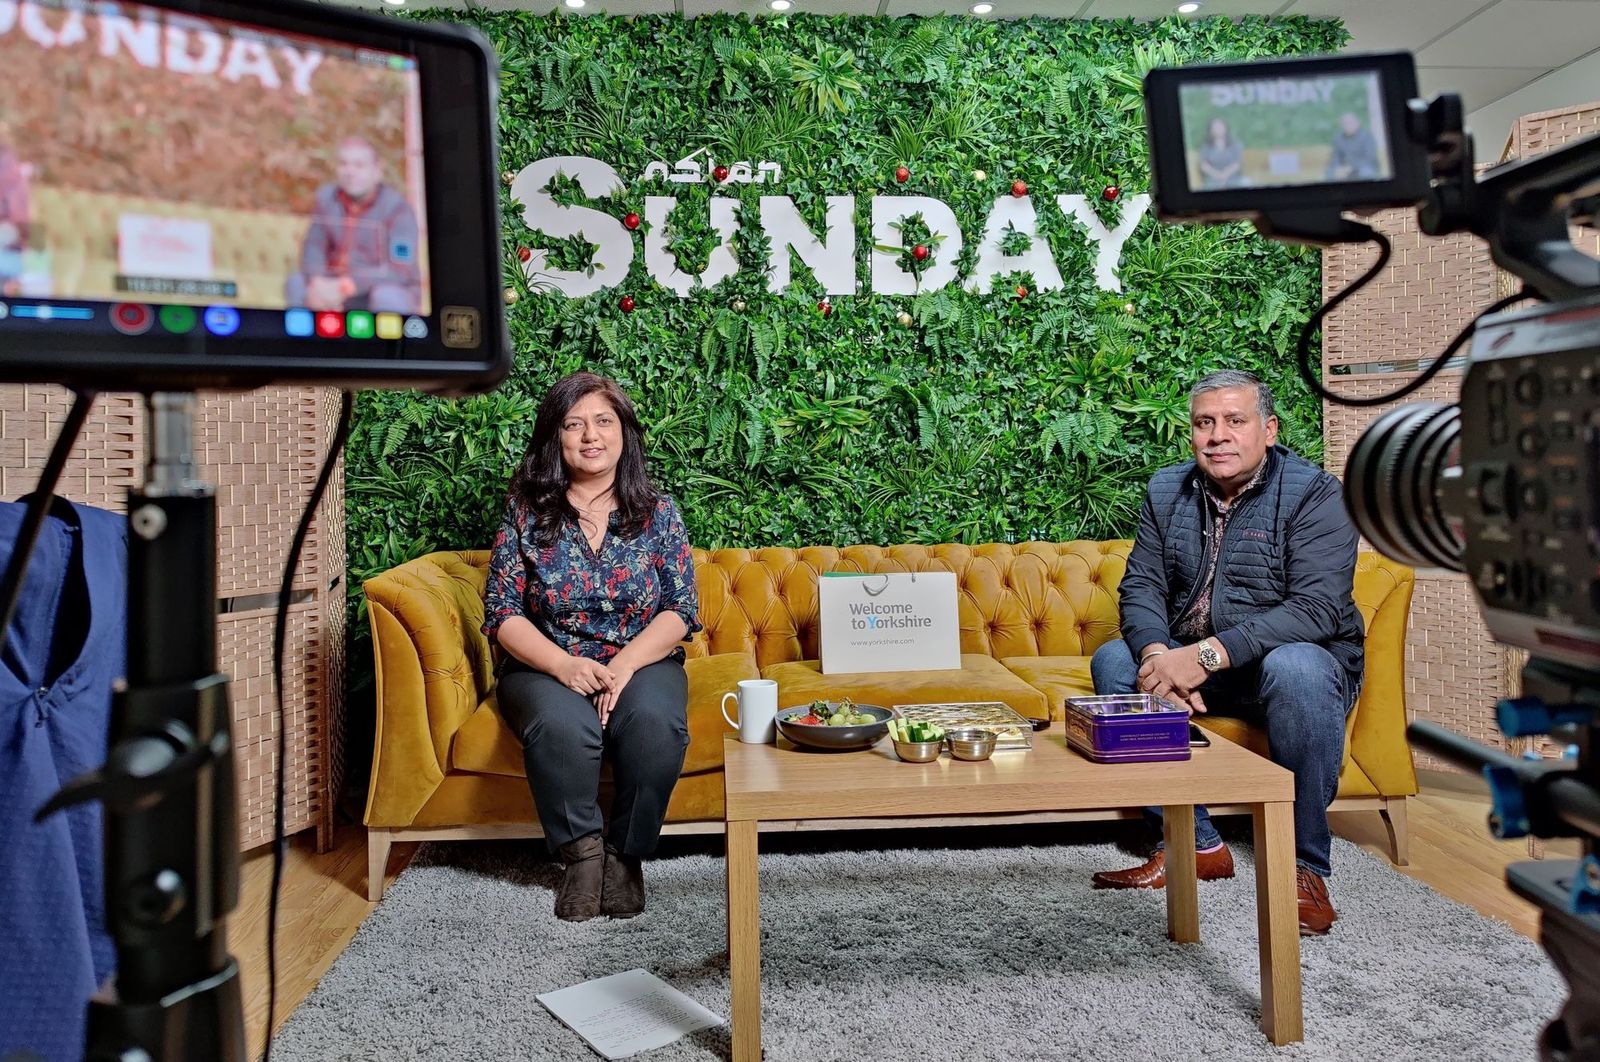 Asian Sunday digital revamp sees new-look TV channel launch